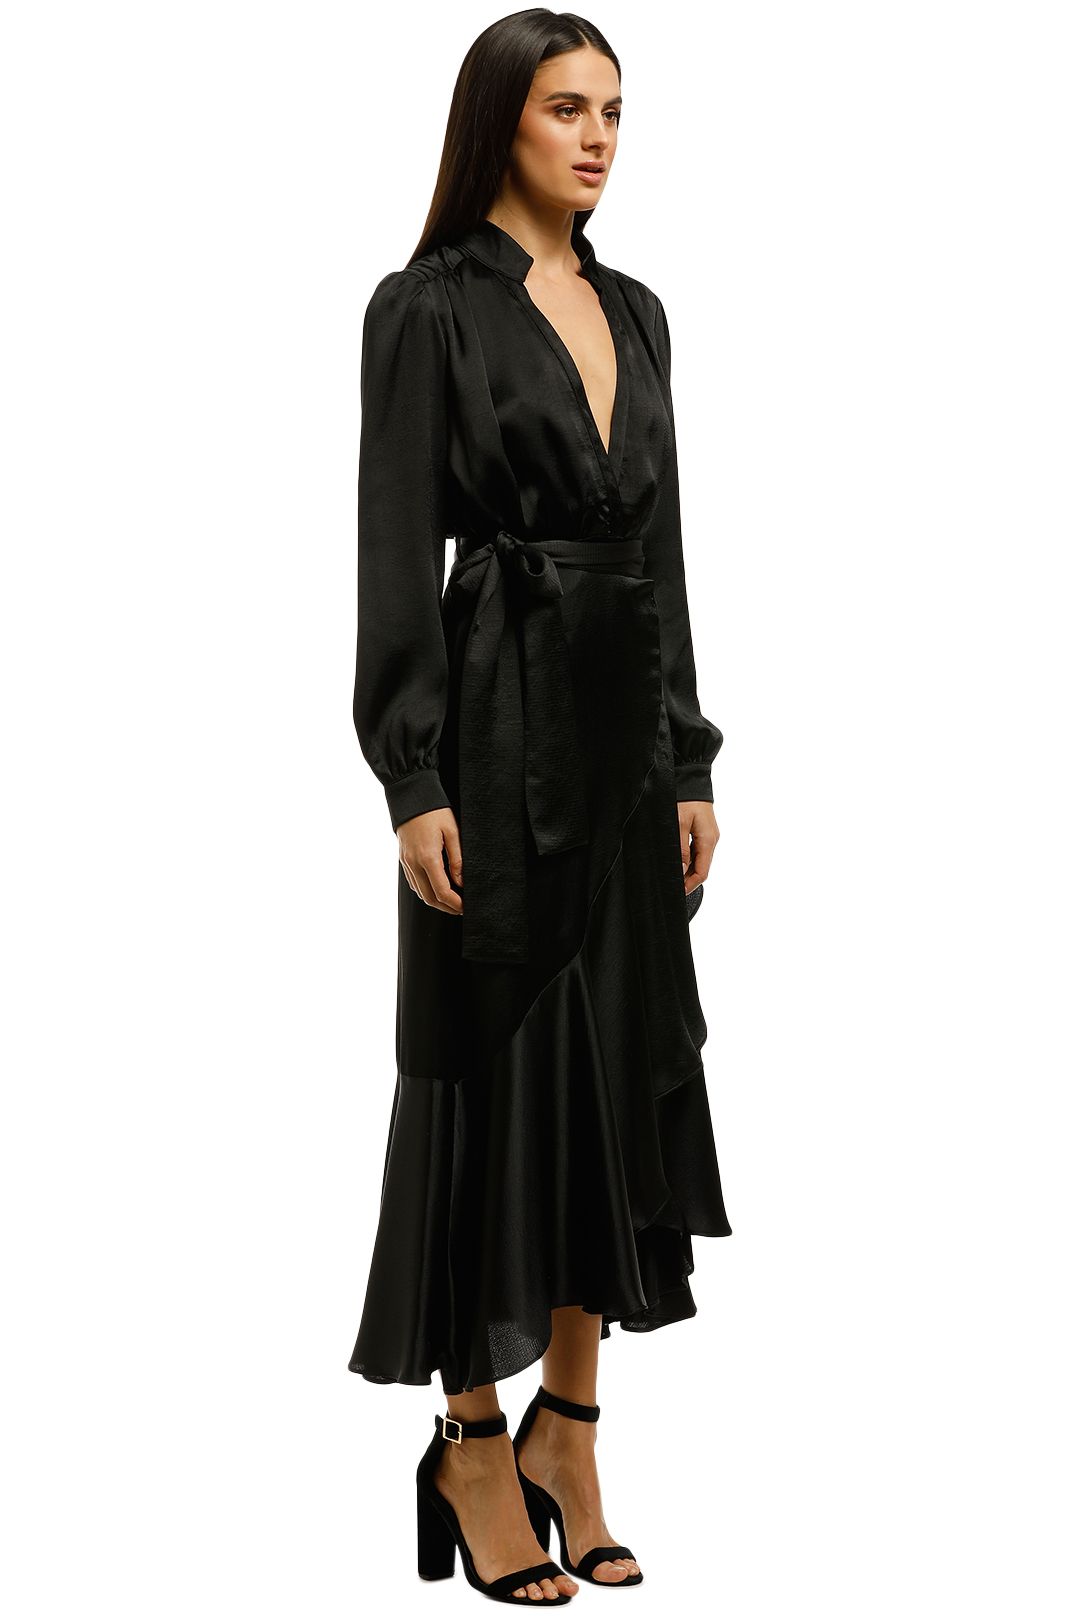 Perry Midi Dress in Black by Pasduchas for Rent